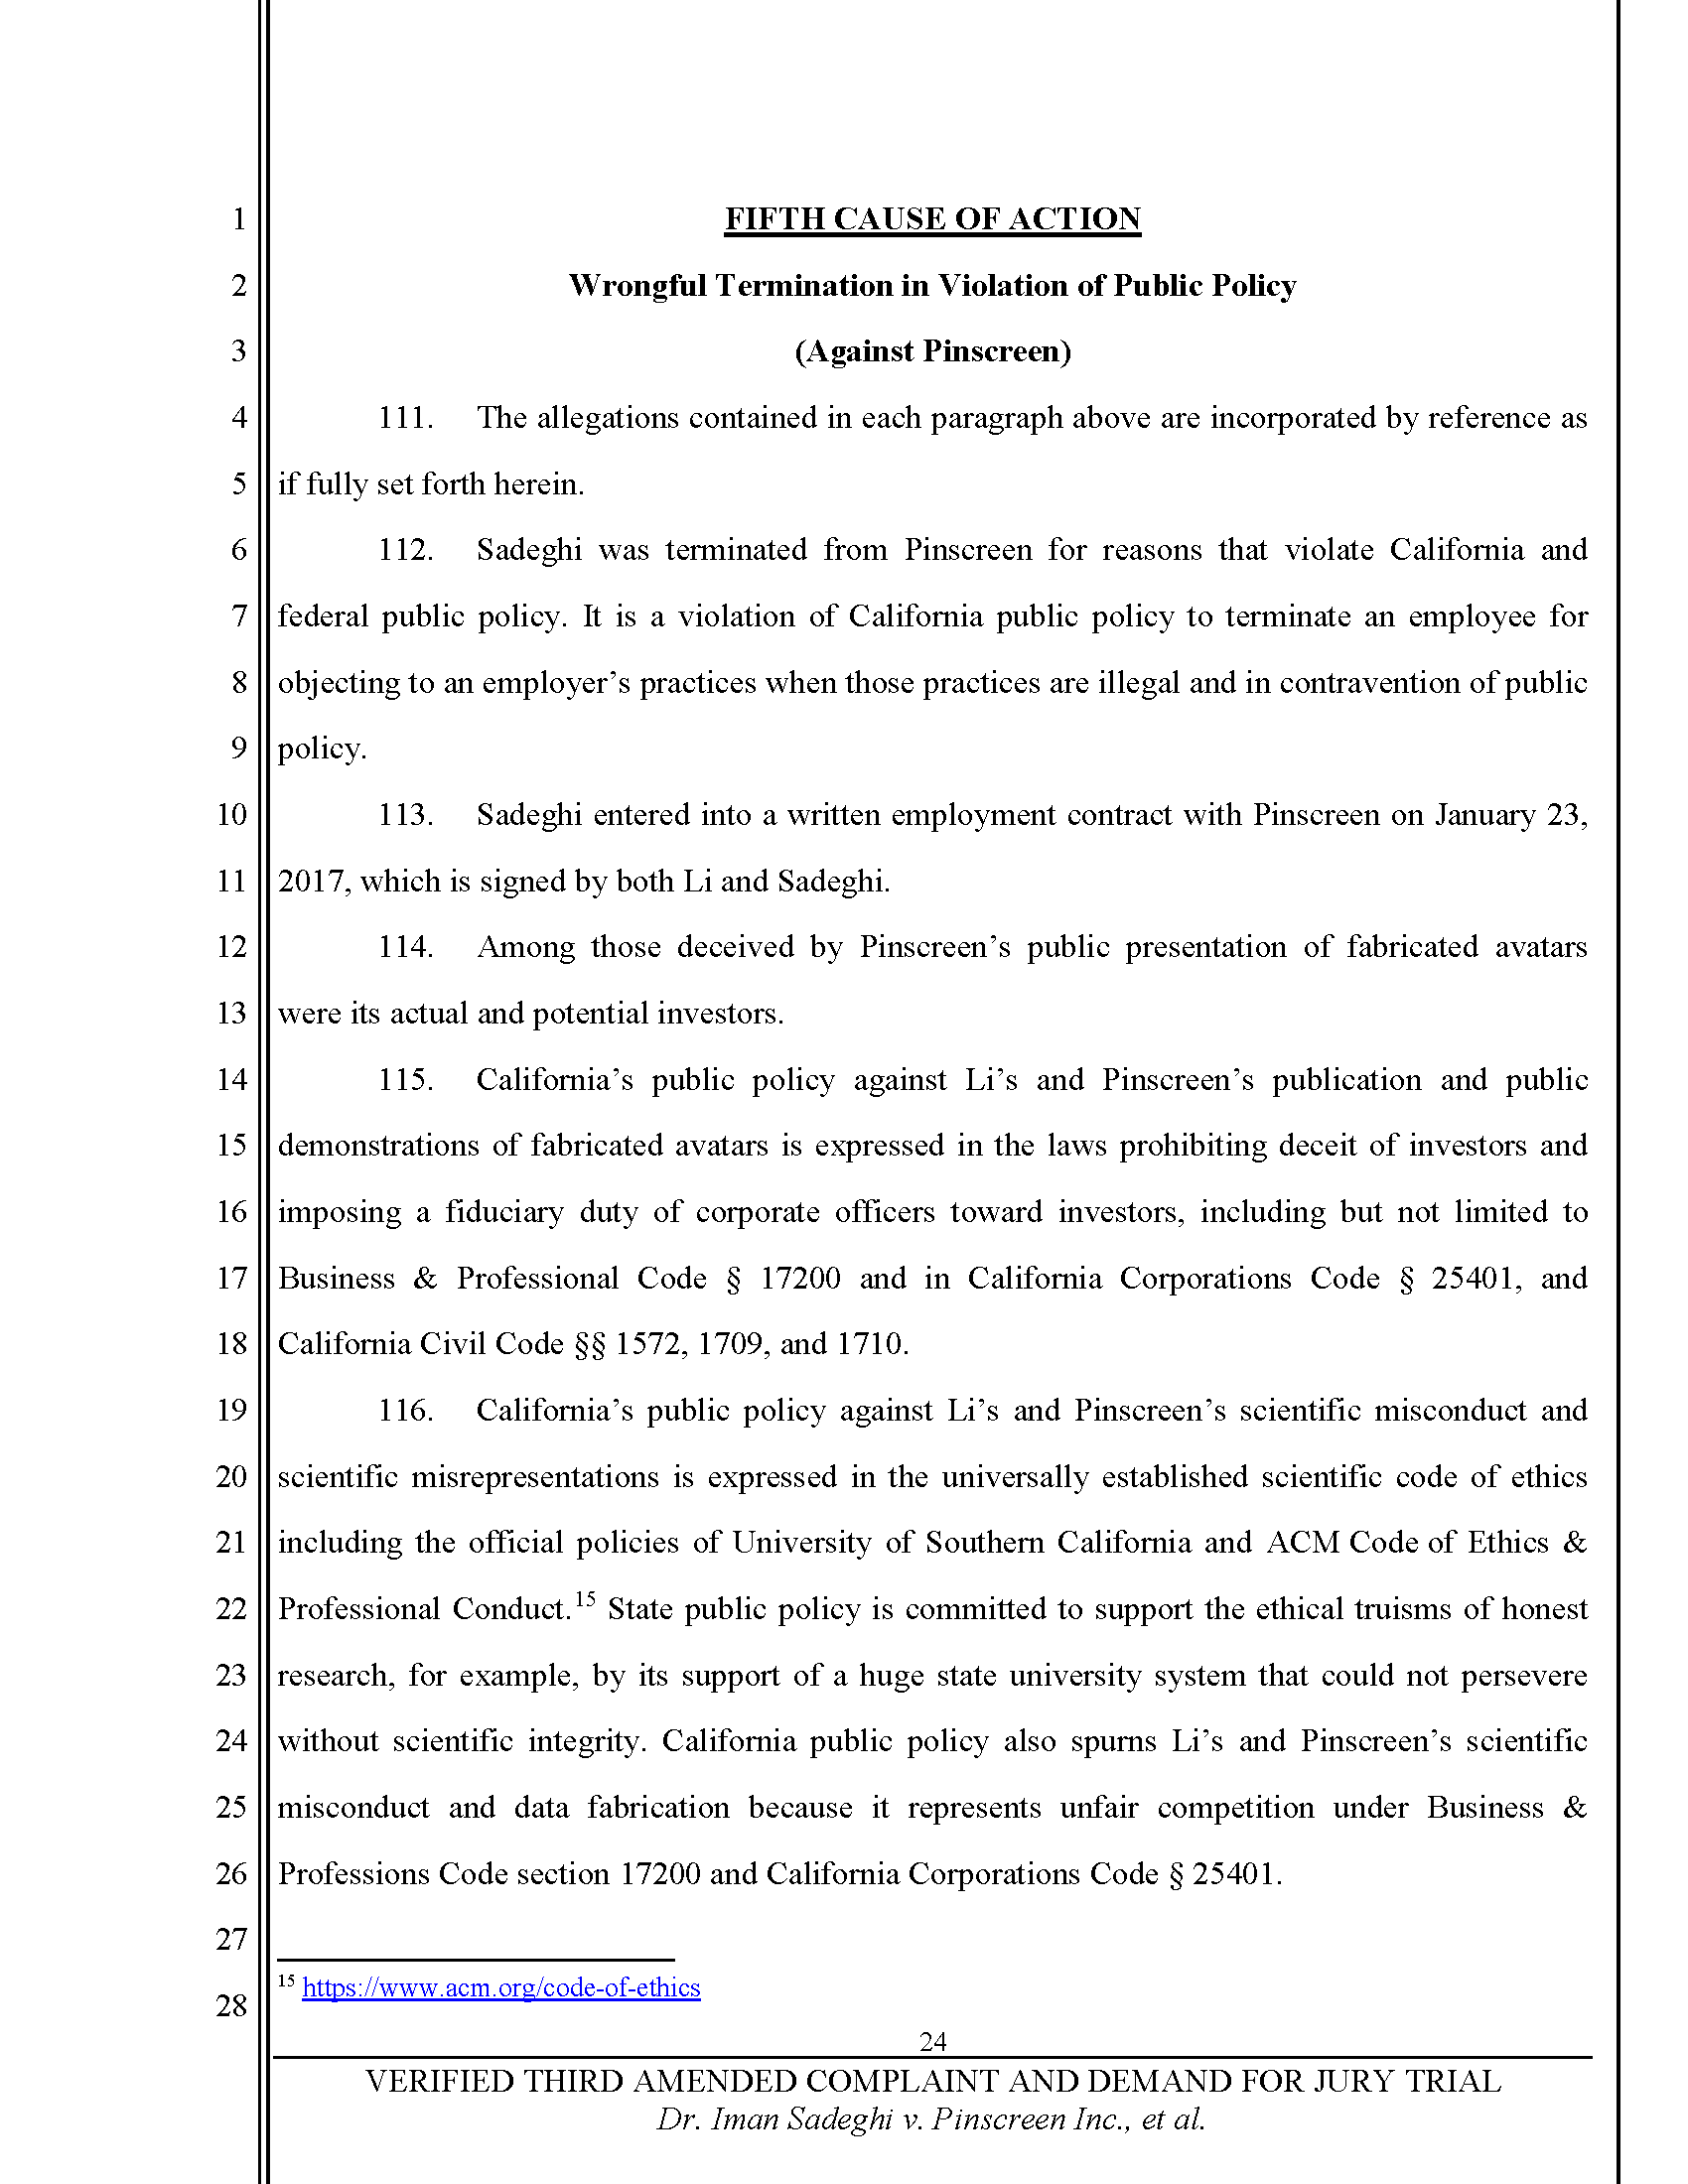 Third Amended Complaint (TAC) Page 25